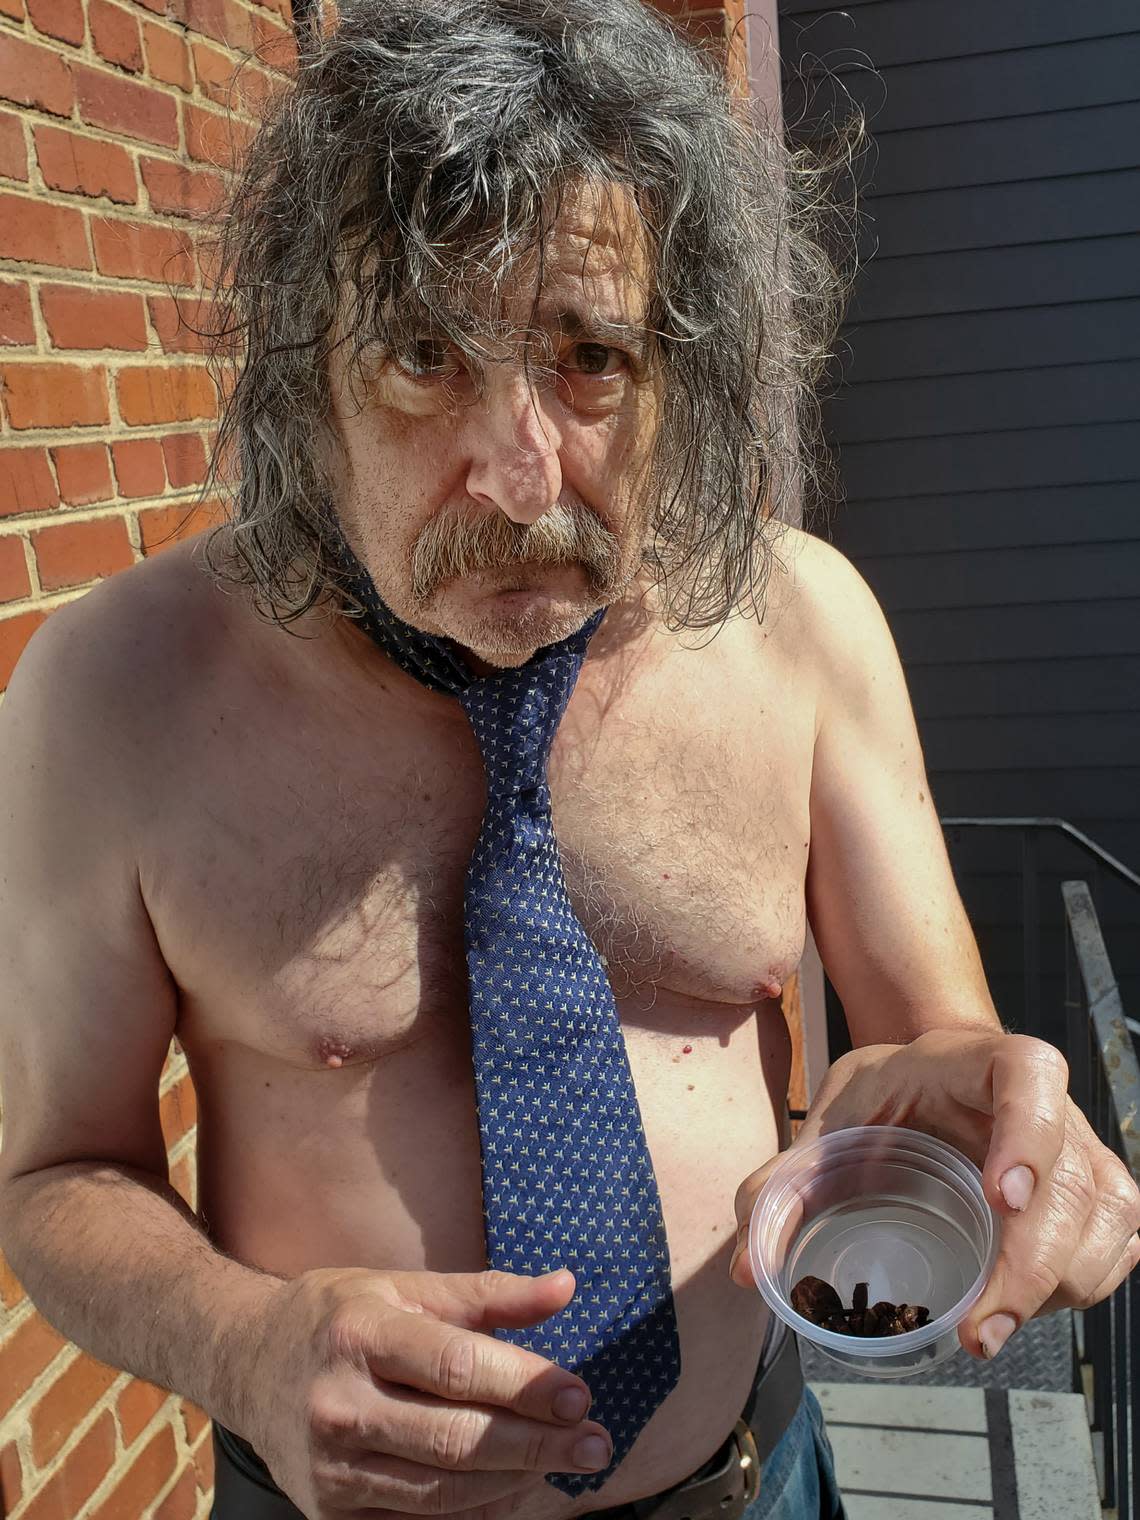 Here is Gene Weingarten snacking on dehydrated tarantula with no shirt and a tie, as one does.